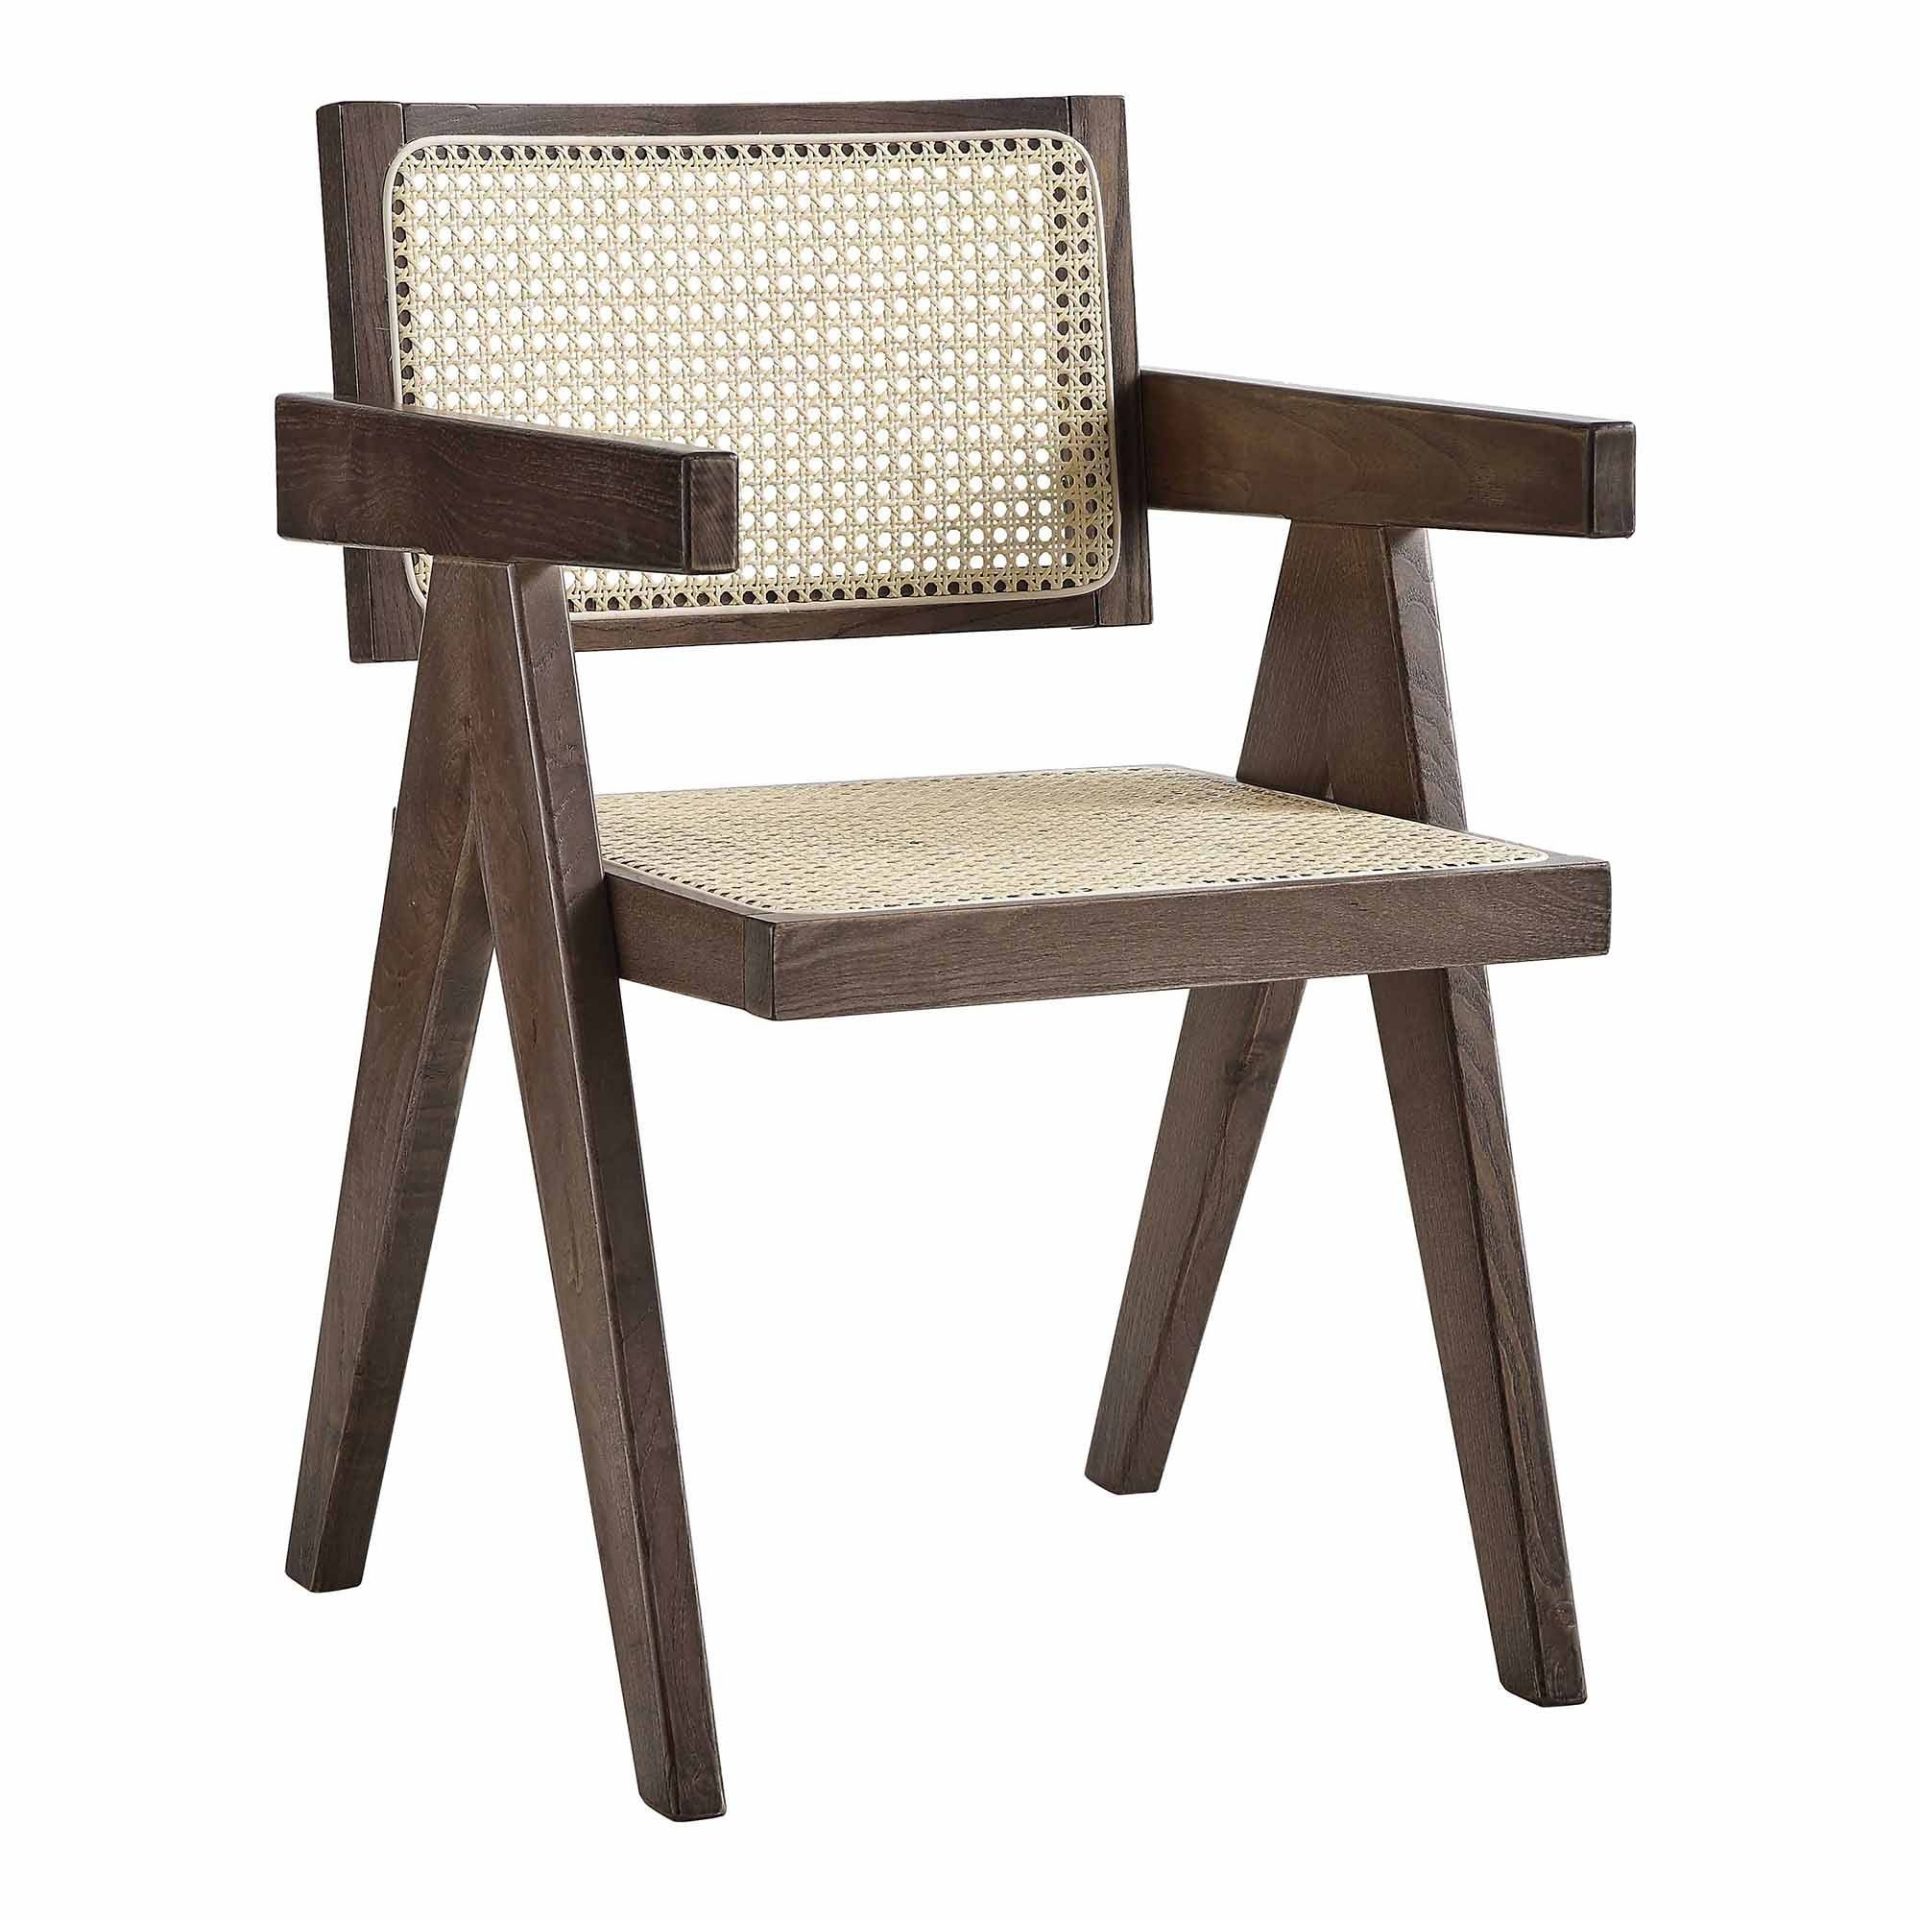 Jeanne Dark Walnut Cane Rattan Solid Beech Wood Dining Chair. - ER30. RRP £209.99. The cane rattan - Image 2 of 2